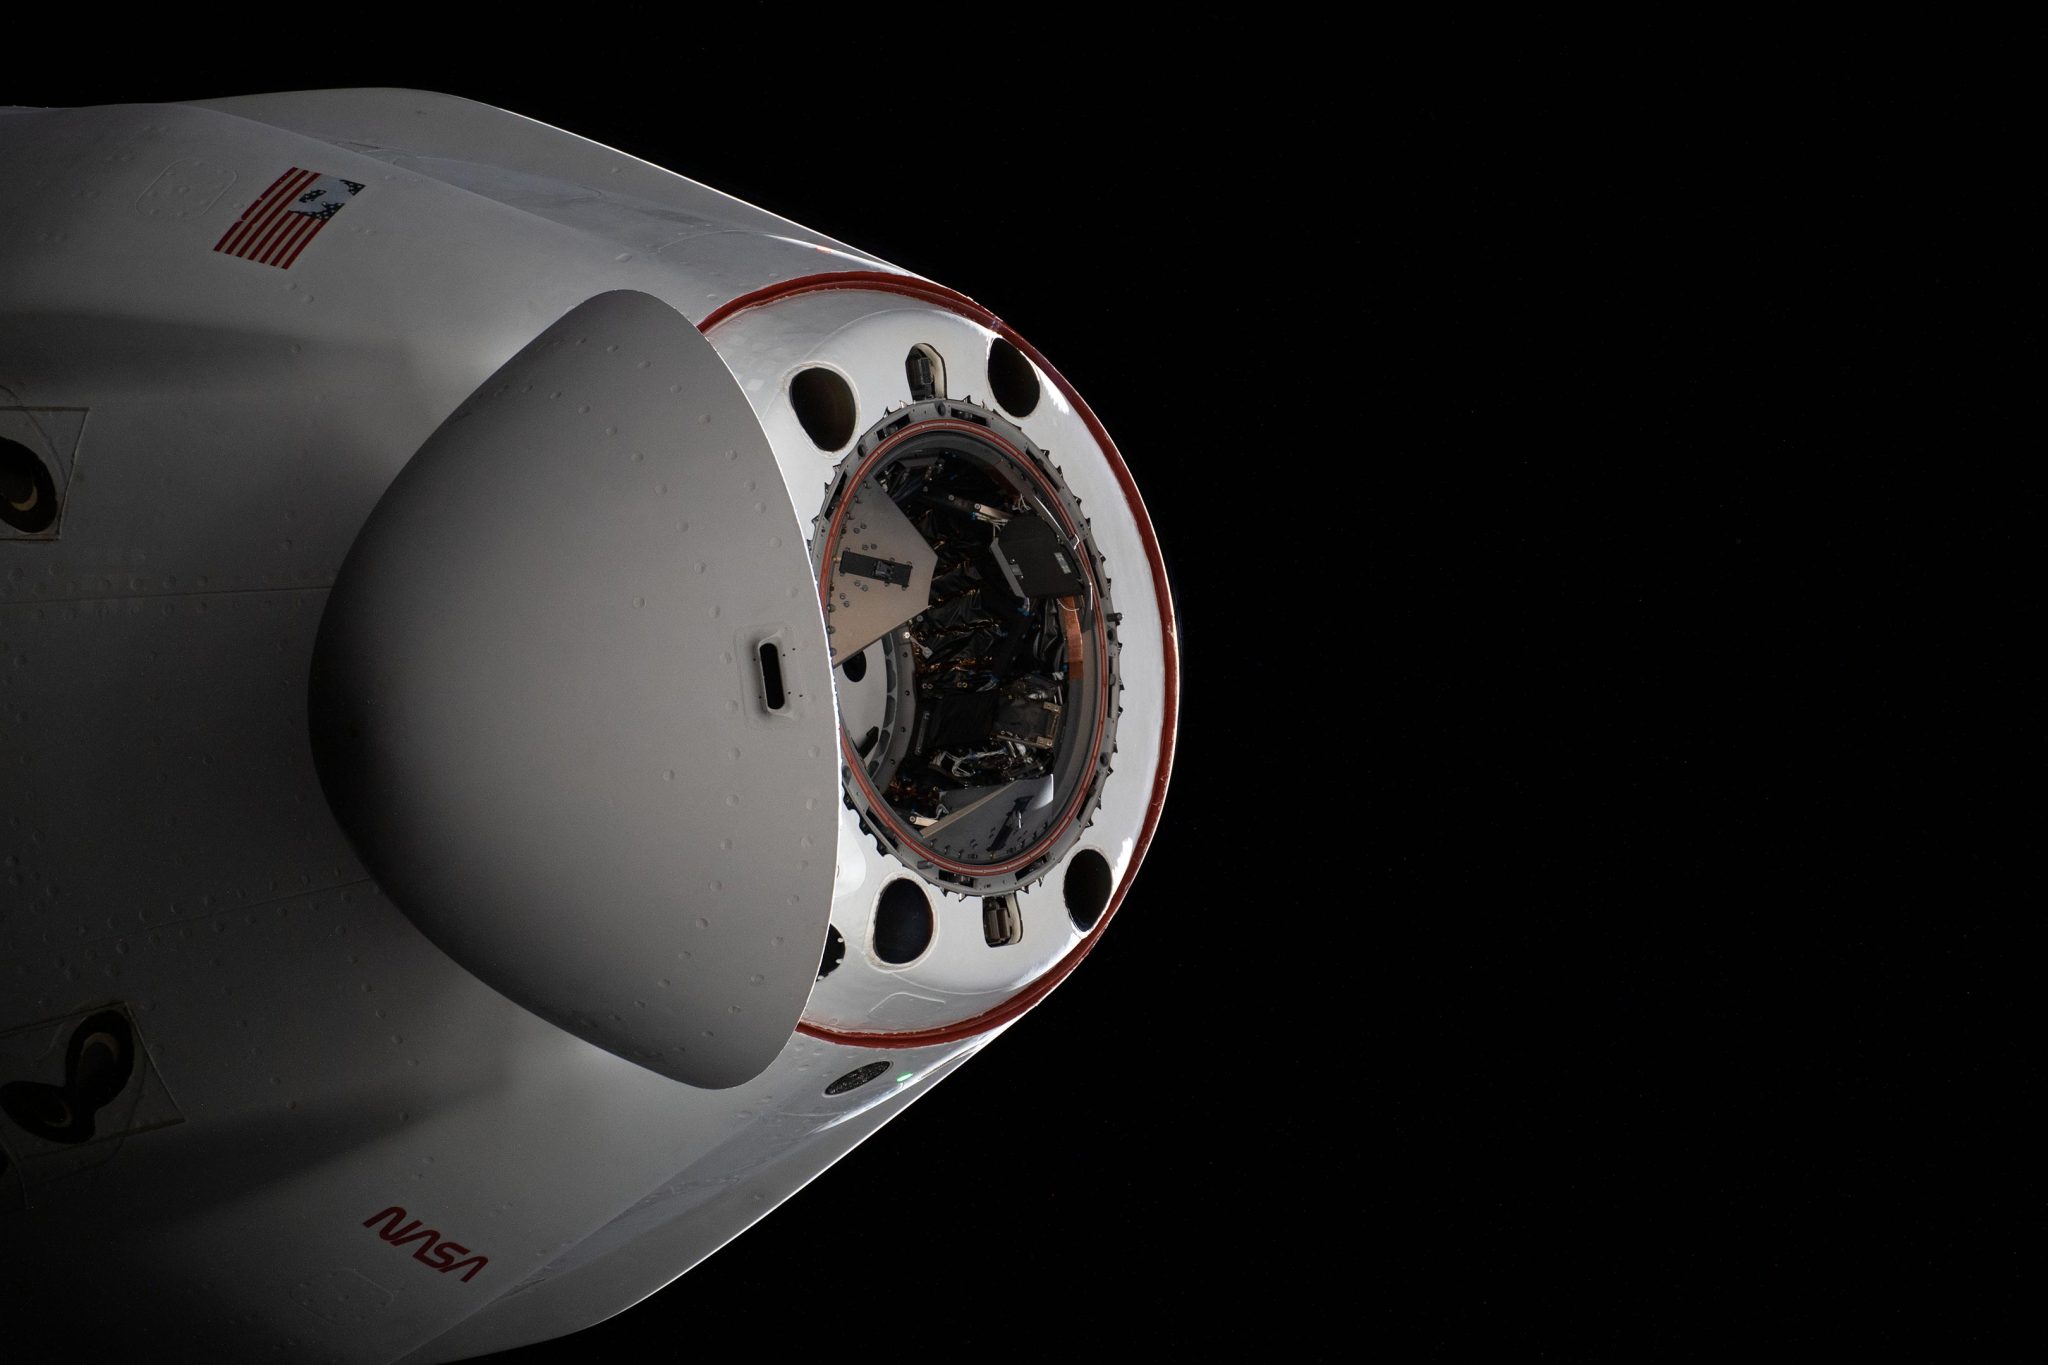 SpaceX Cargo Dragon Resupply Ship With Nose Cone Open